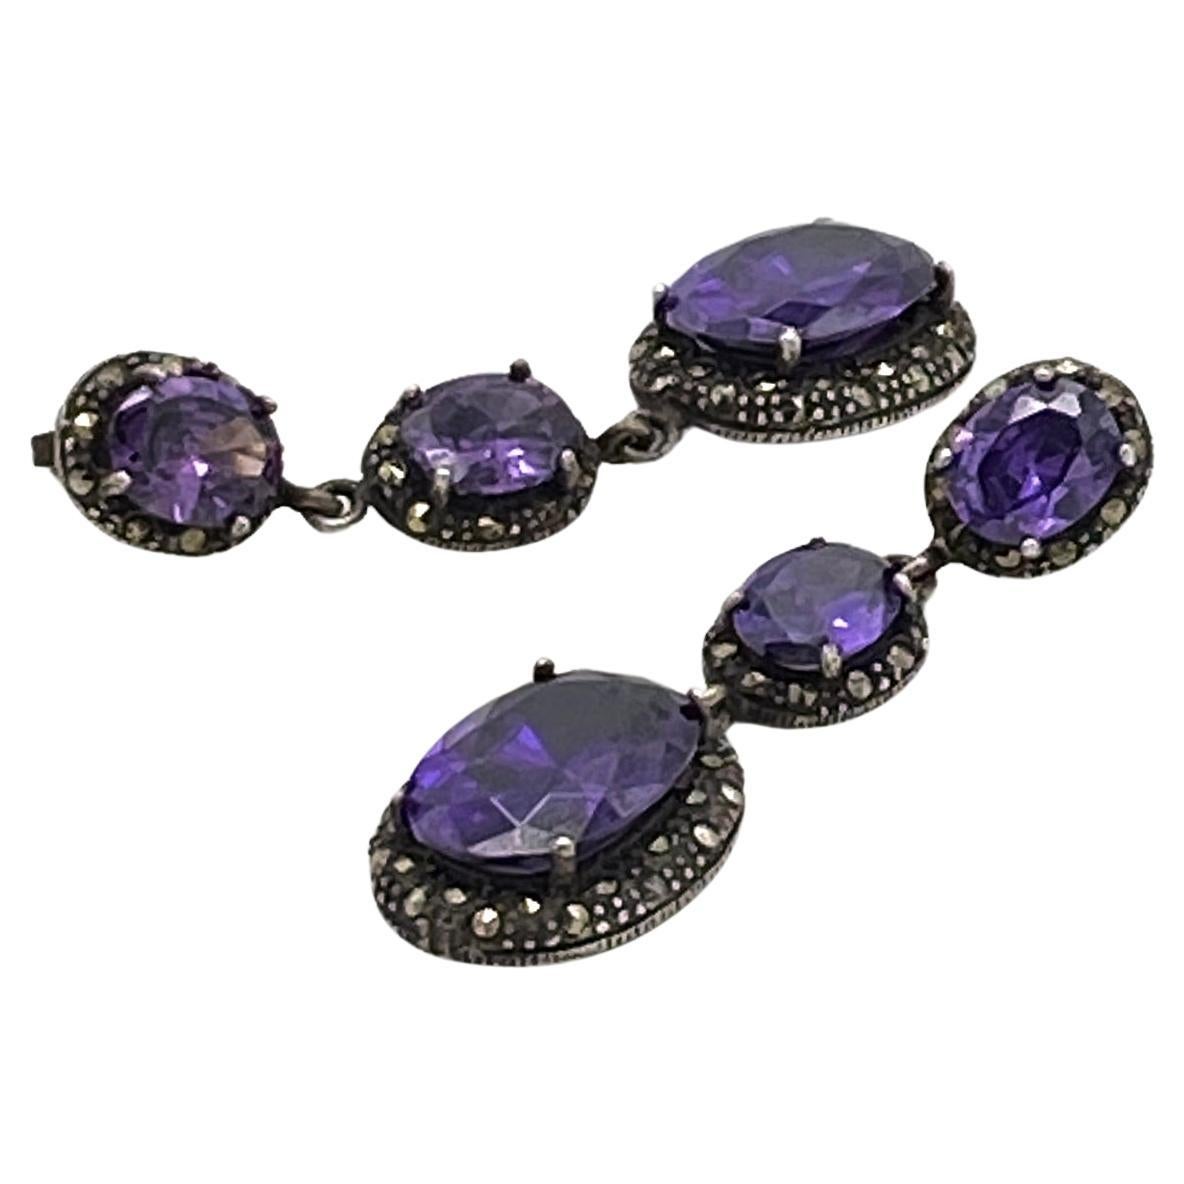 This is a pair of iolite crystal and sterling dangle earrings. There are three linked various sized oval cut transparent iolite crystal stones set in marcasite frames. These deep purple stones with dark acidified sterling frames broadcast mysterious